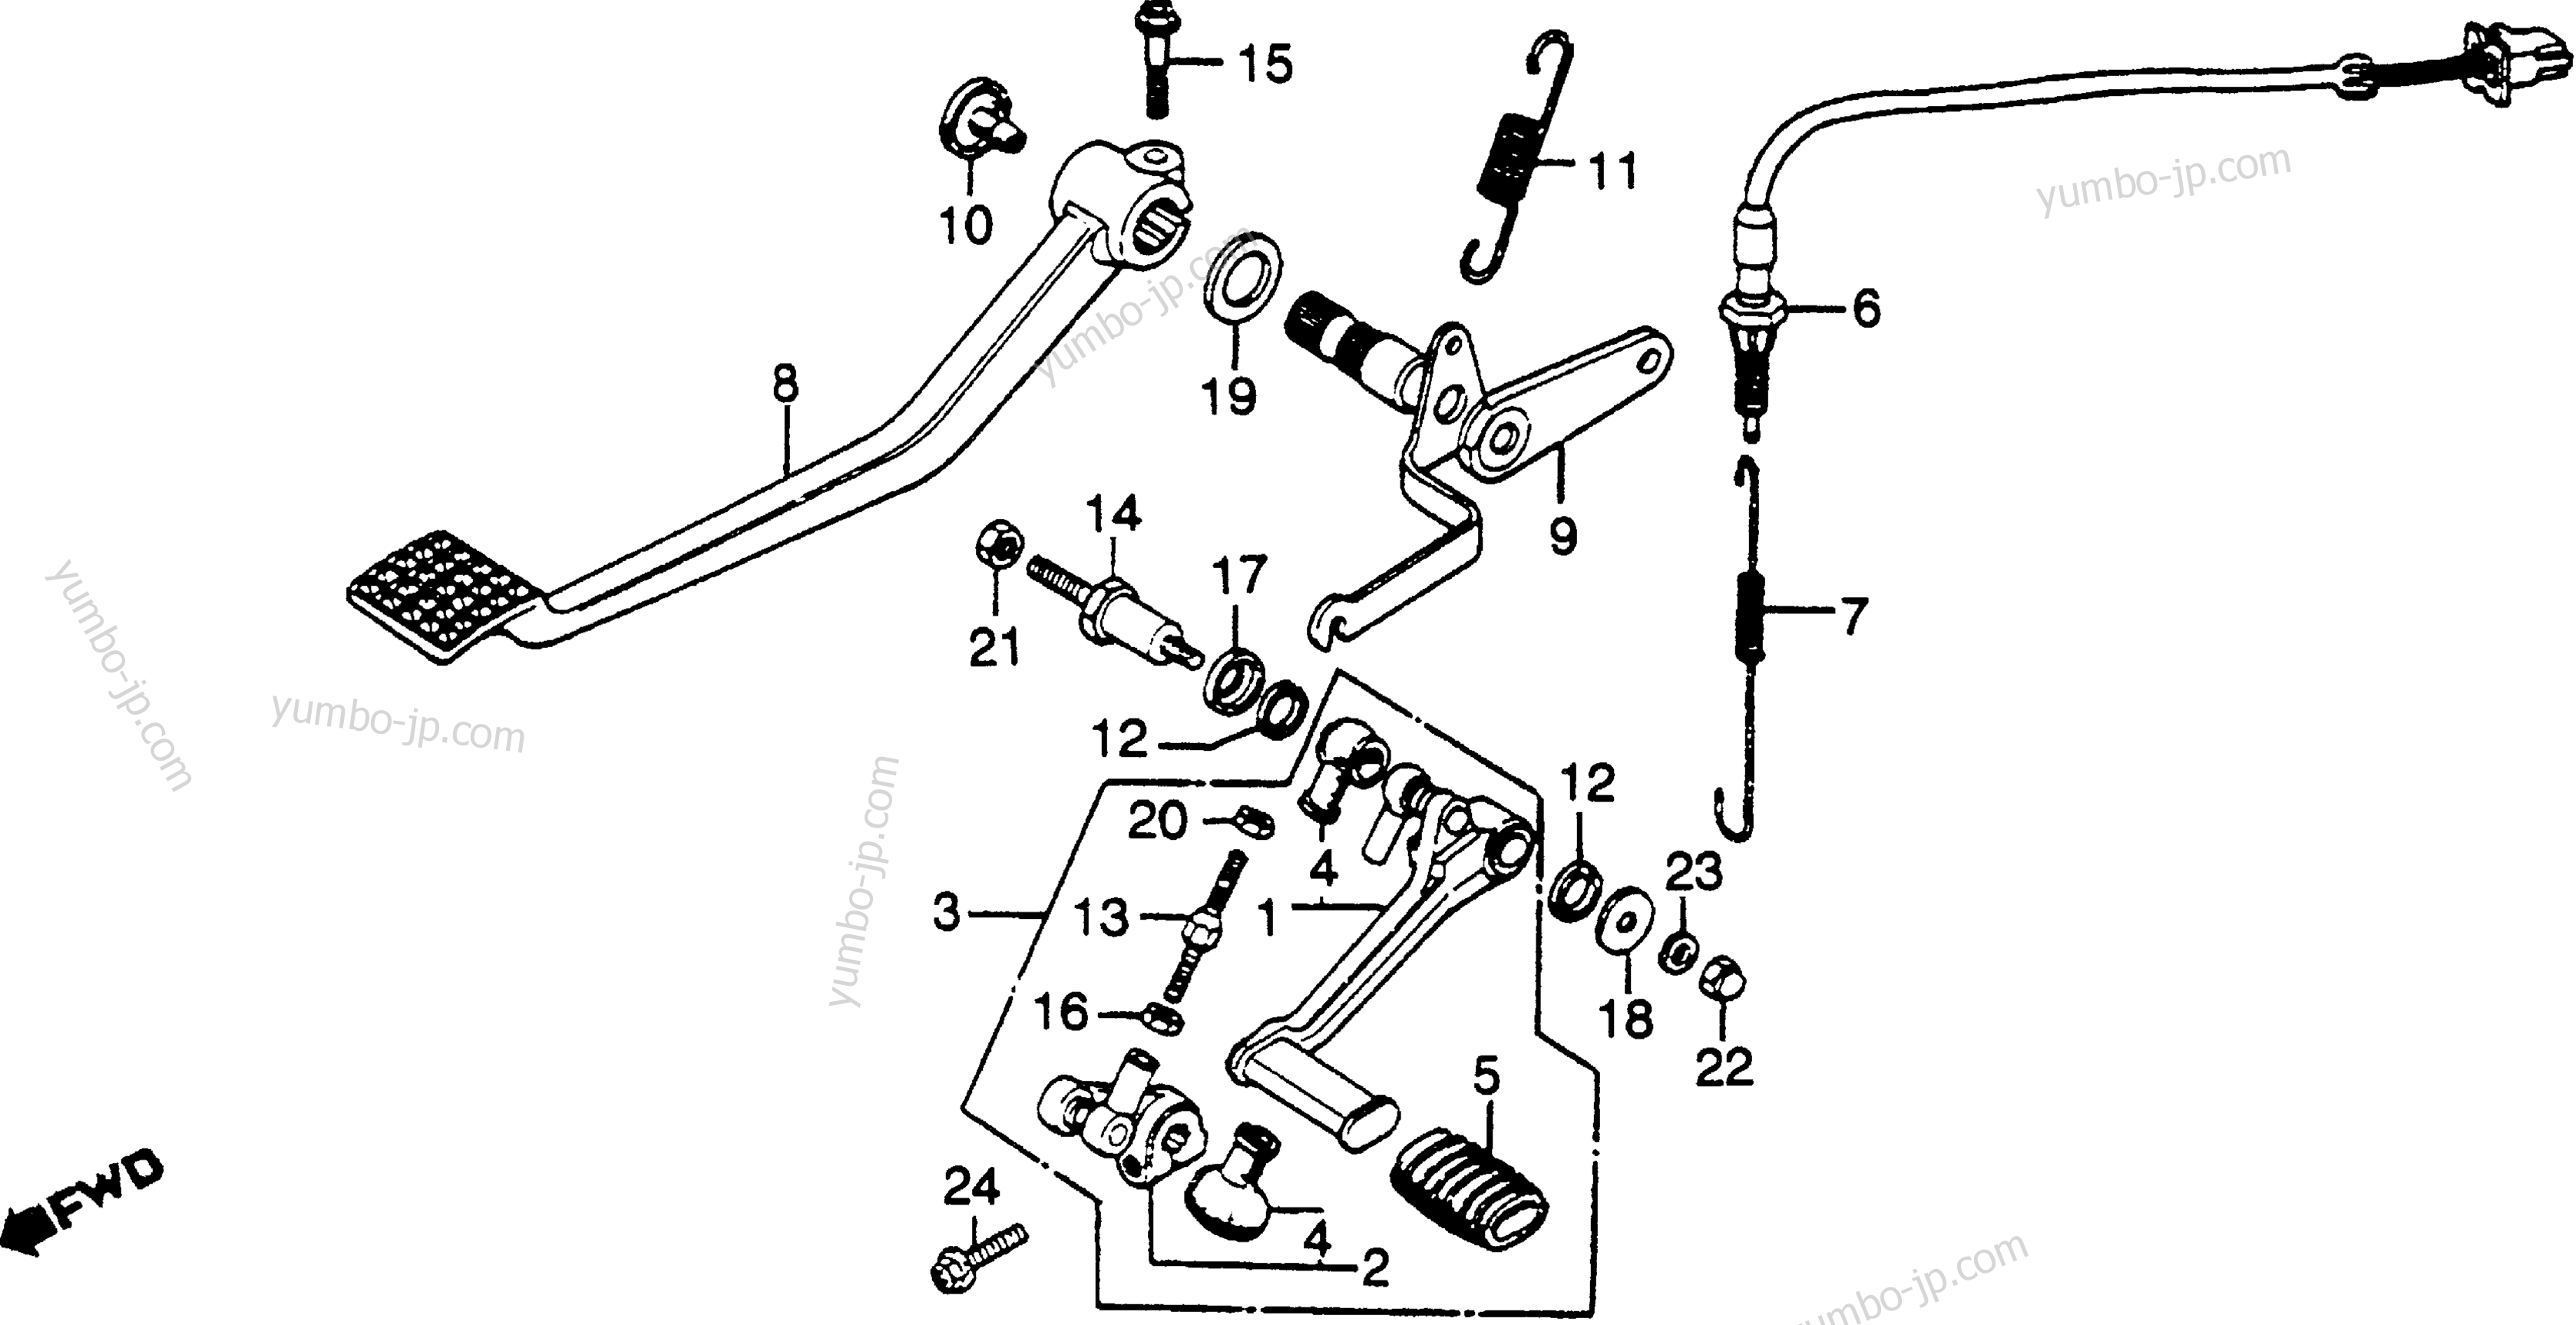 BRAKE PEDAL / SHIFT PEDAL for motorcycles HONDA CBX A 1979 year